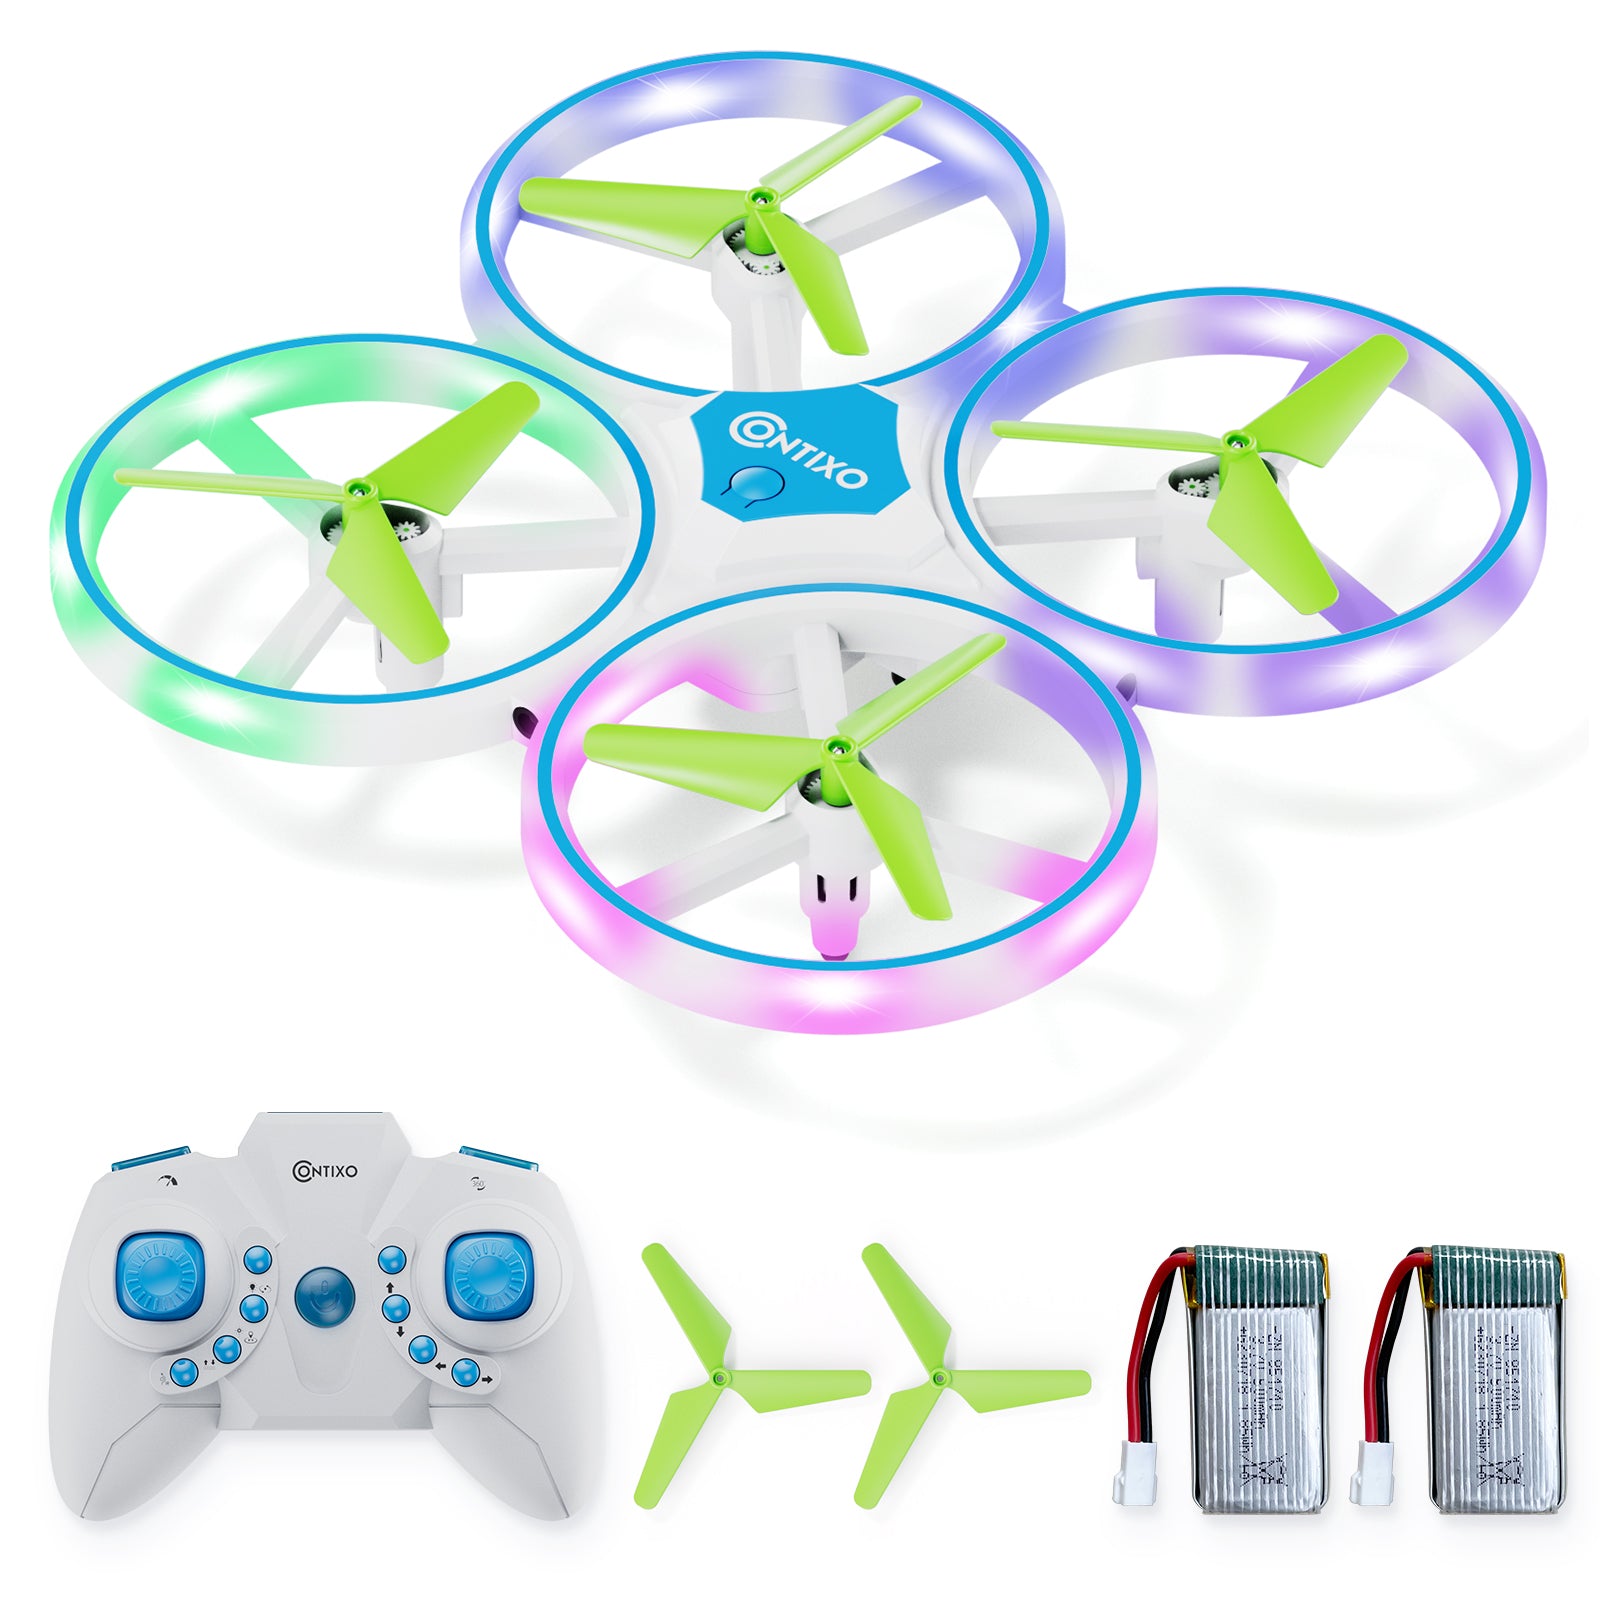 Contixo TD1 Dragonfly Drone with LED Light Effects